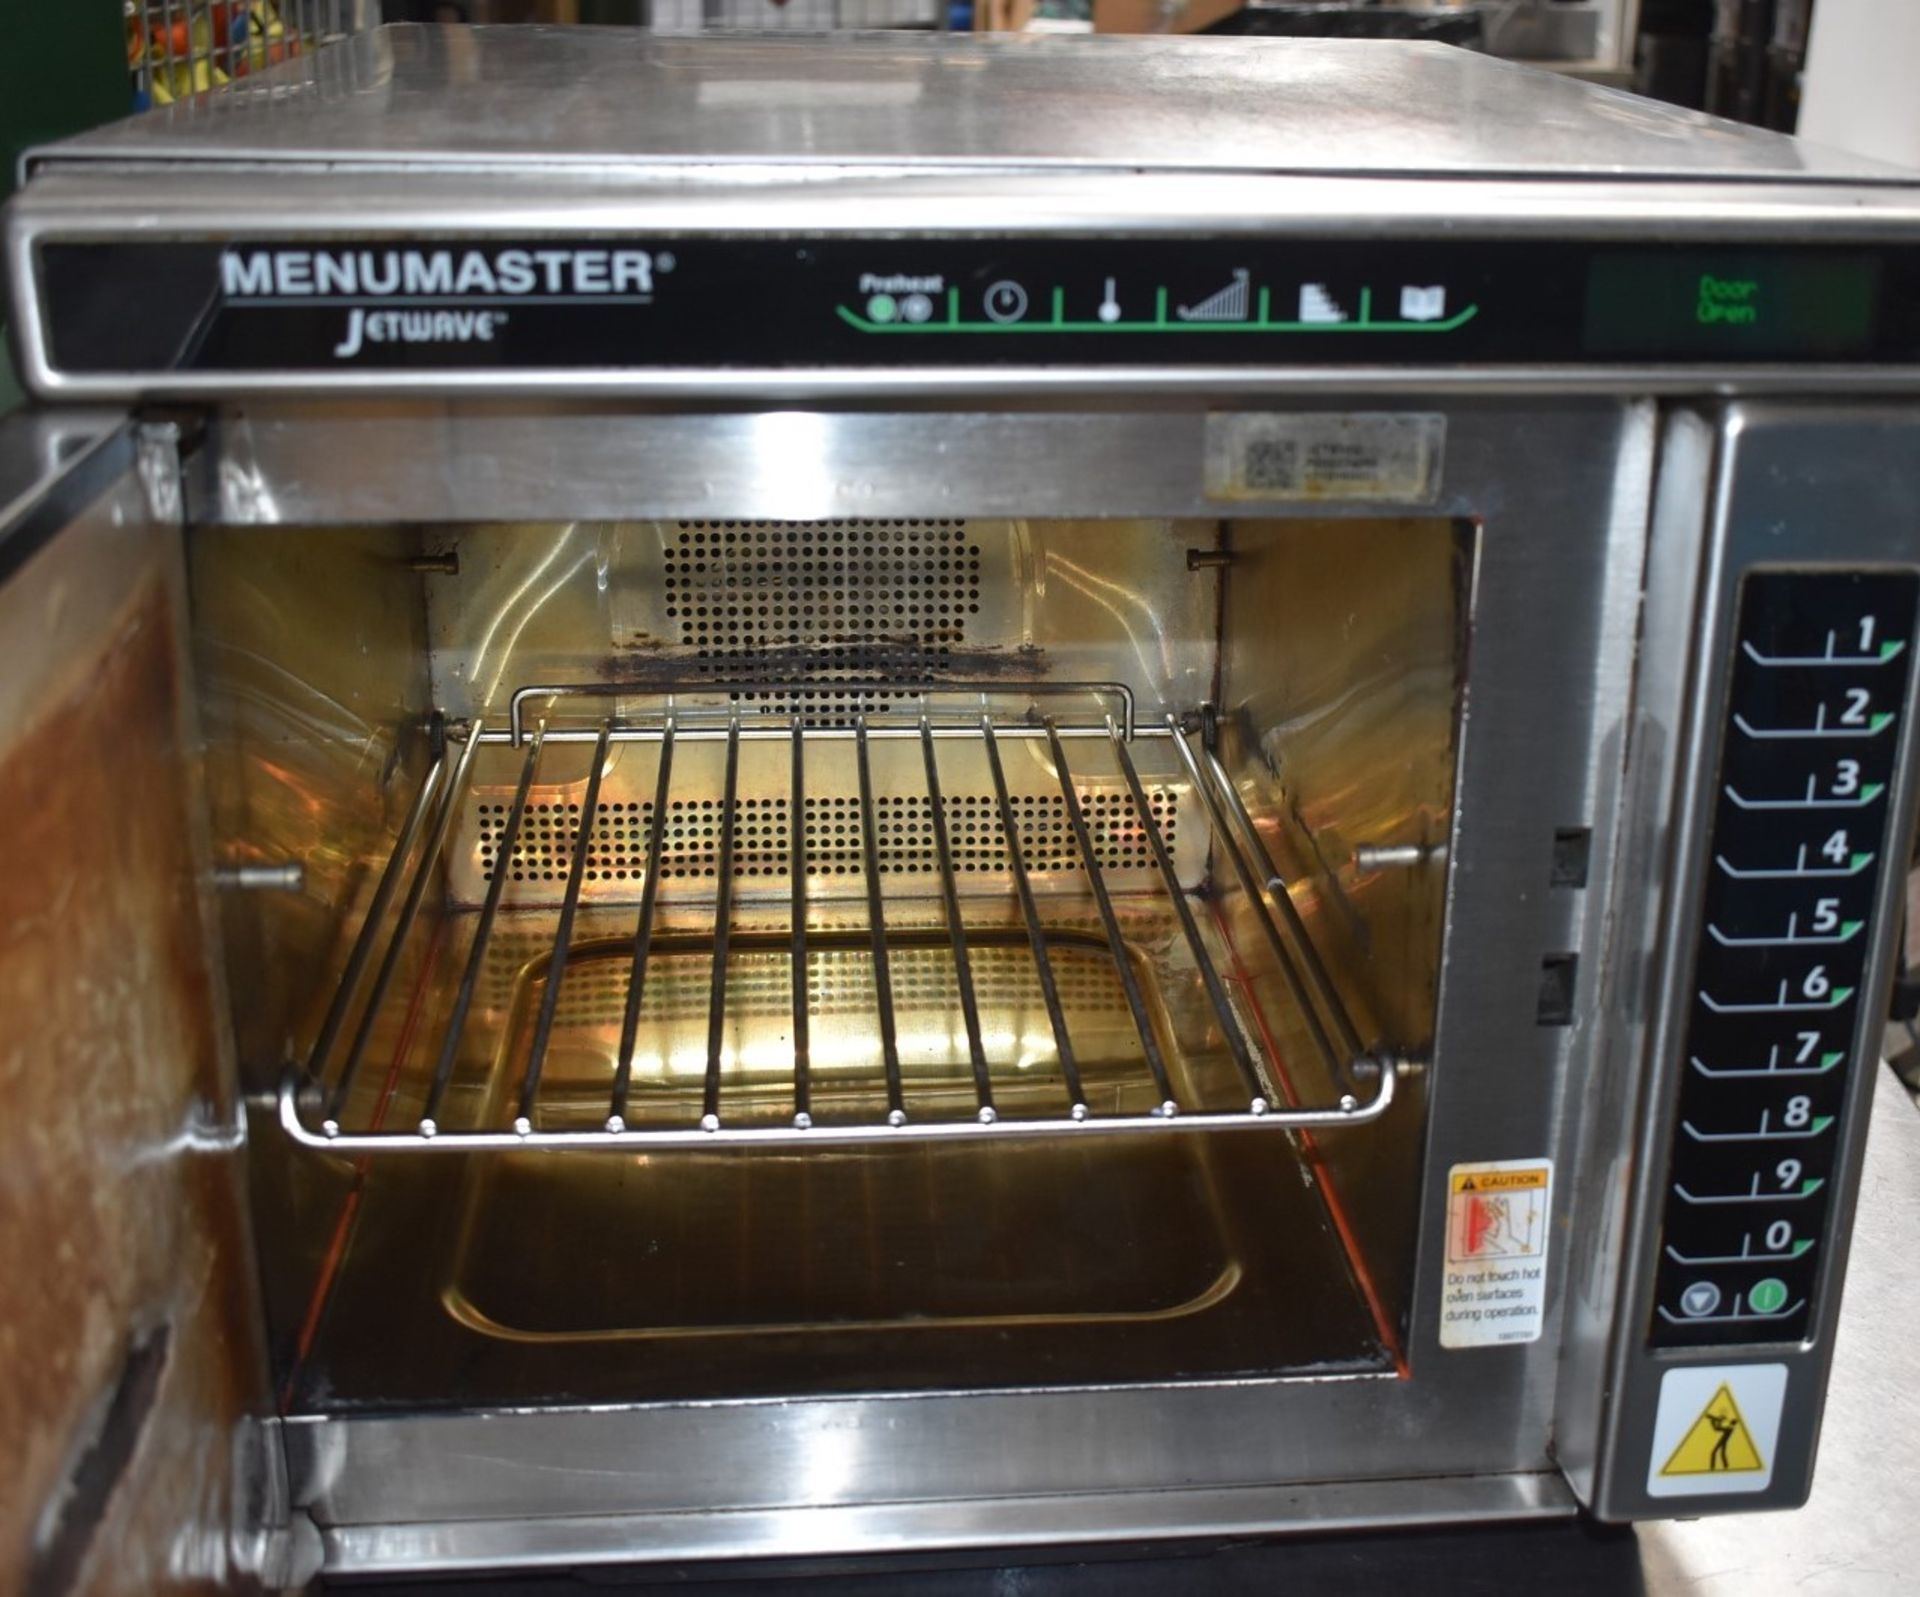 1 x Menumaster Jetwave JET514U High Speed Combination Microwave Oven - RRP £2,400 - Manufacture - Image 10 of 11